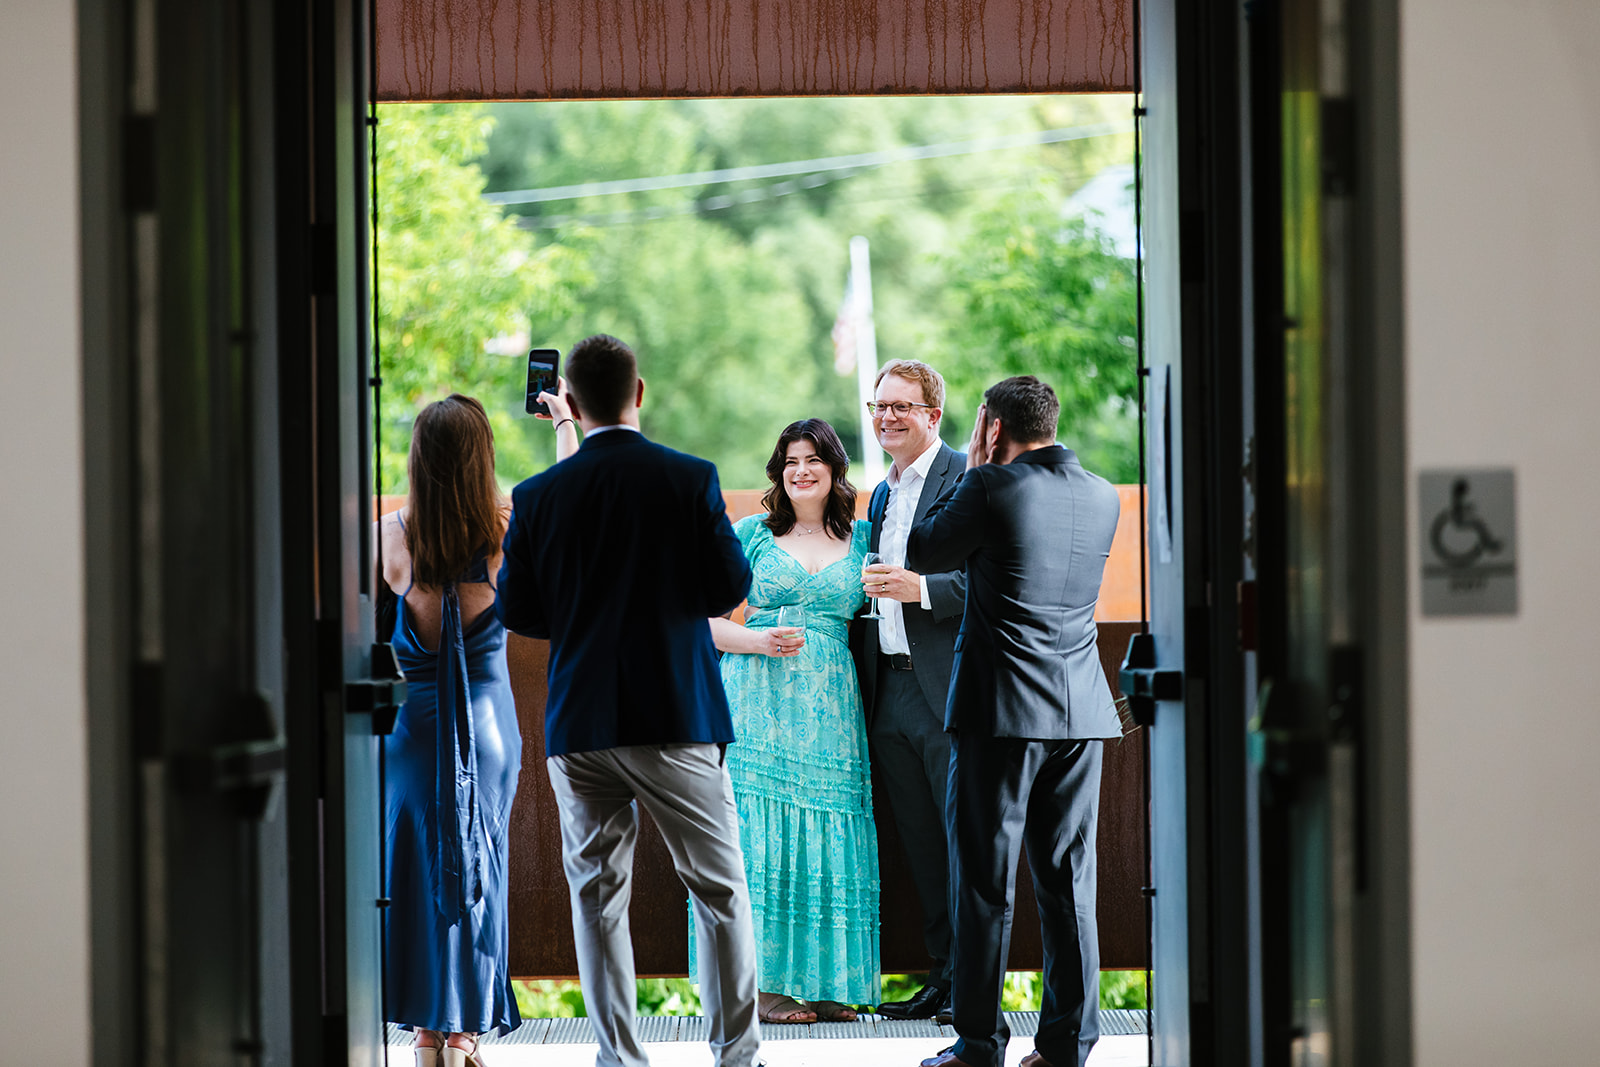 Guests mingle at the Greylock Works Wedding